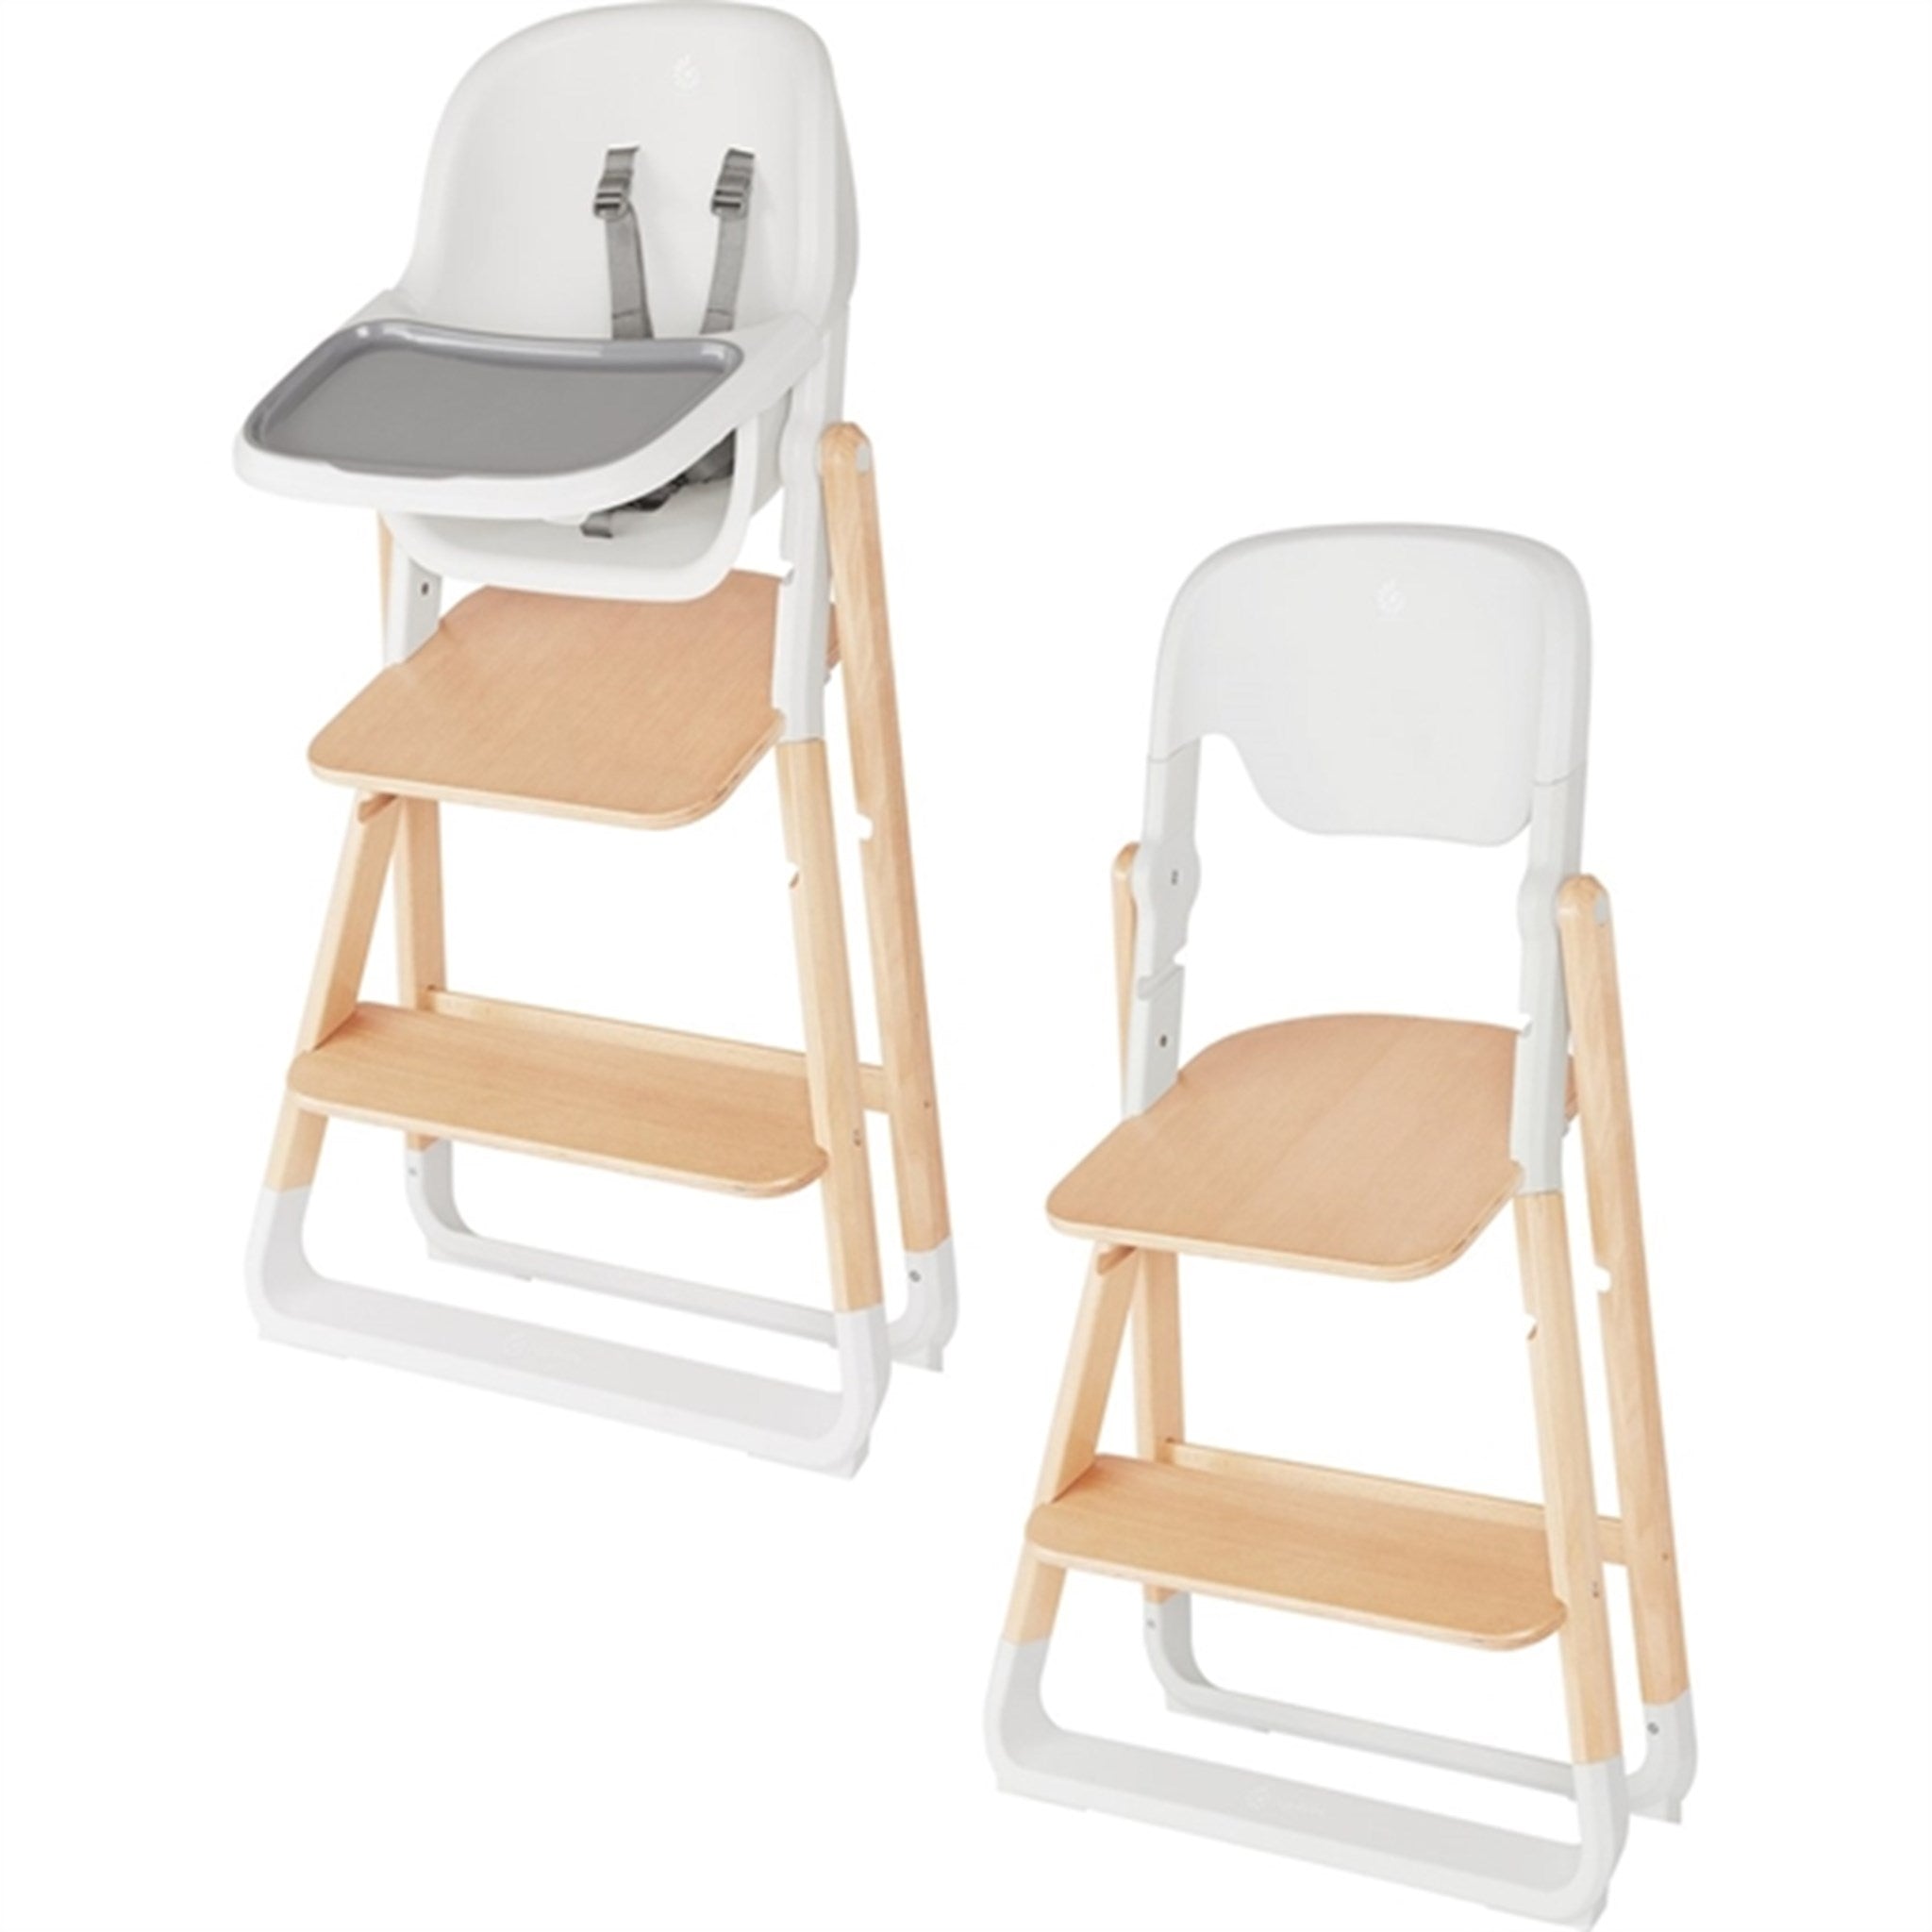 Ergobaby Evolve 2-in-1 High Chair + Chair Natural Wood White 9